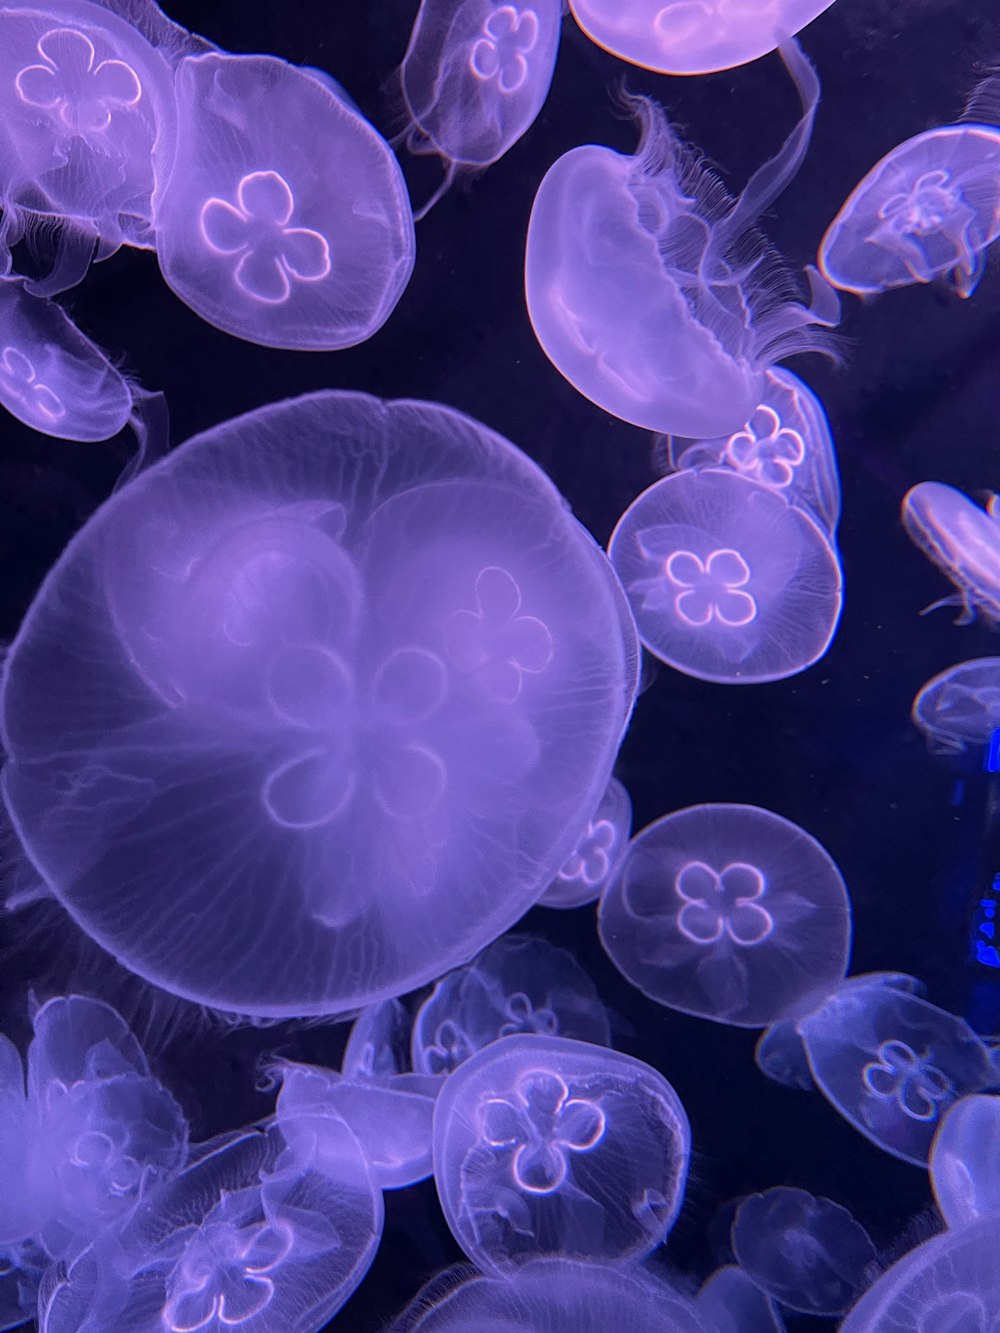 green and white jelly fish